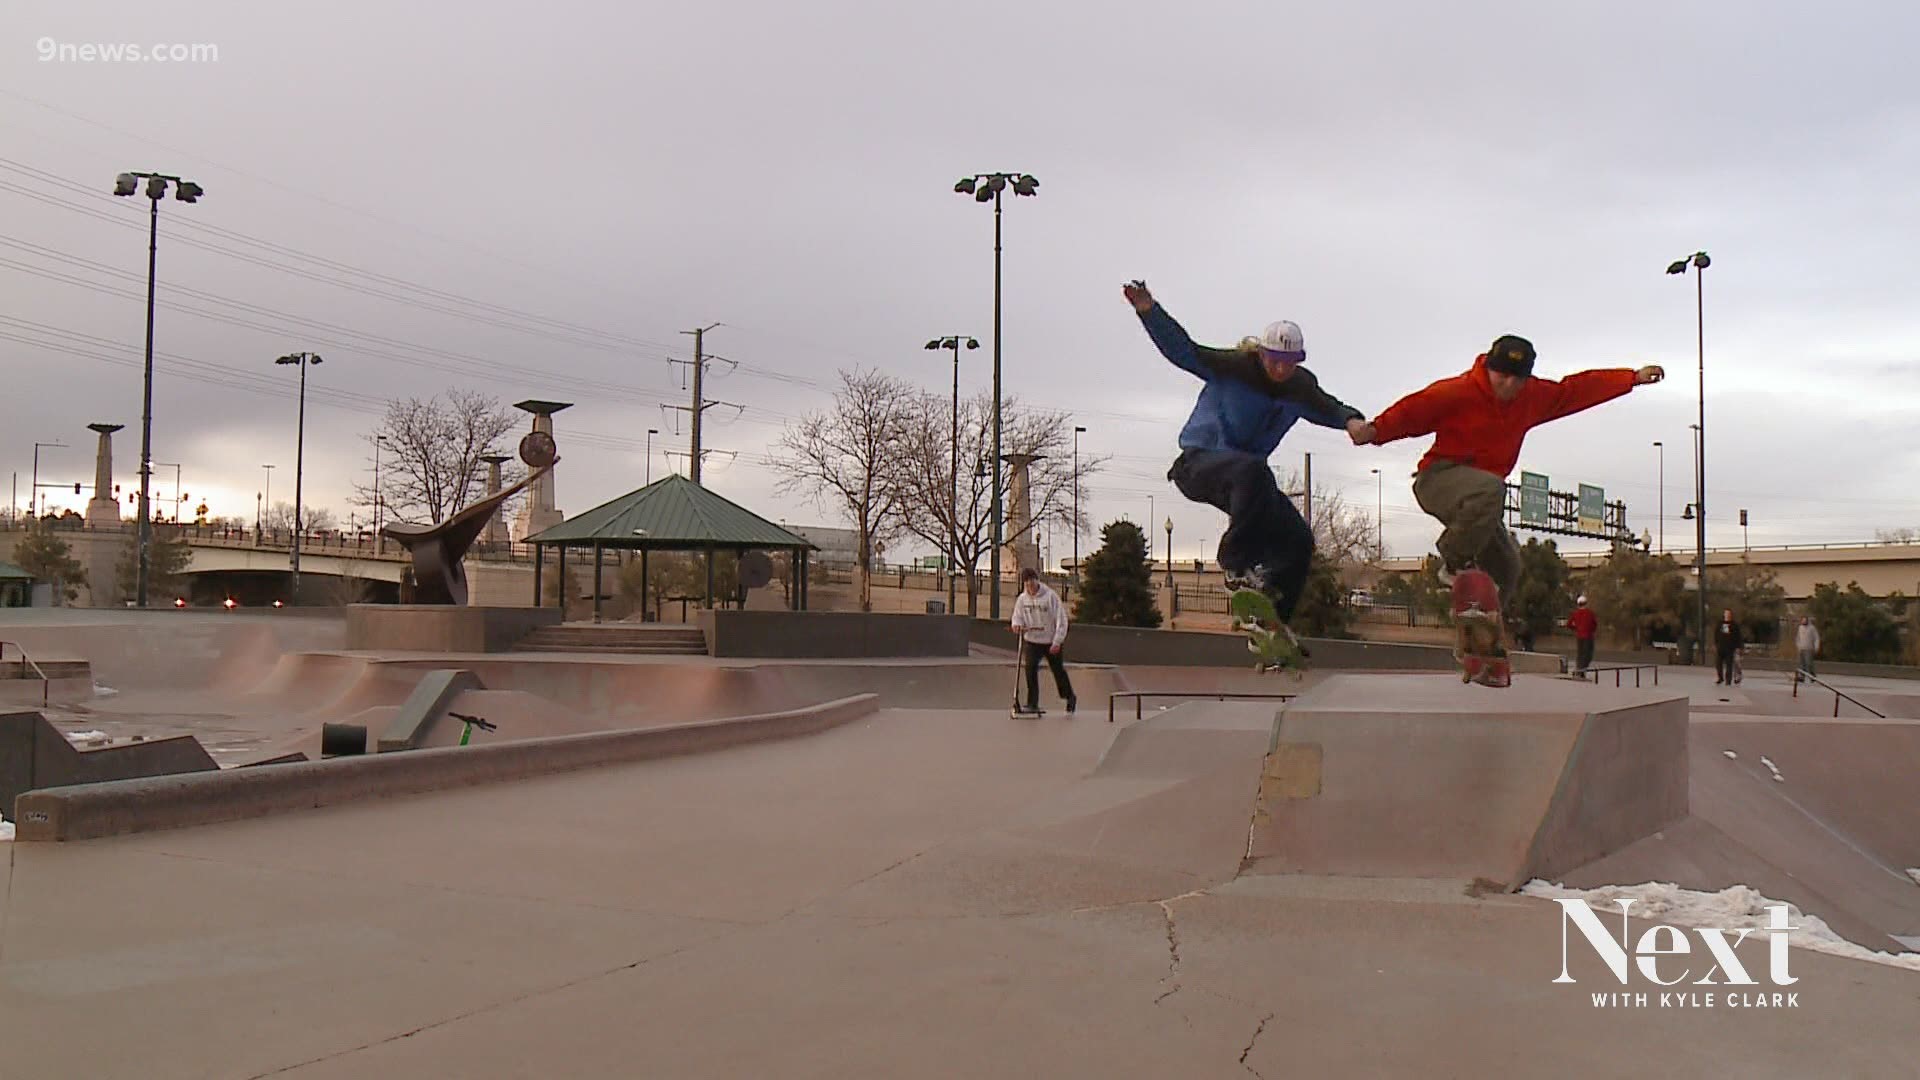 We end every week with an edition of Good News. This week, we went to Denver's skate park.